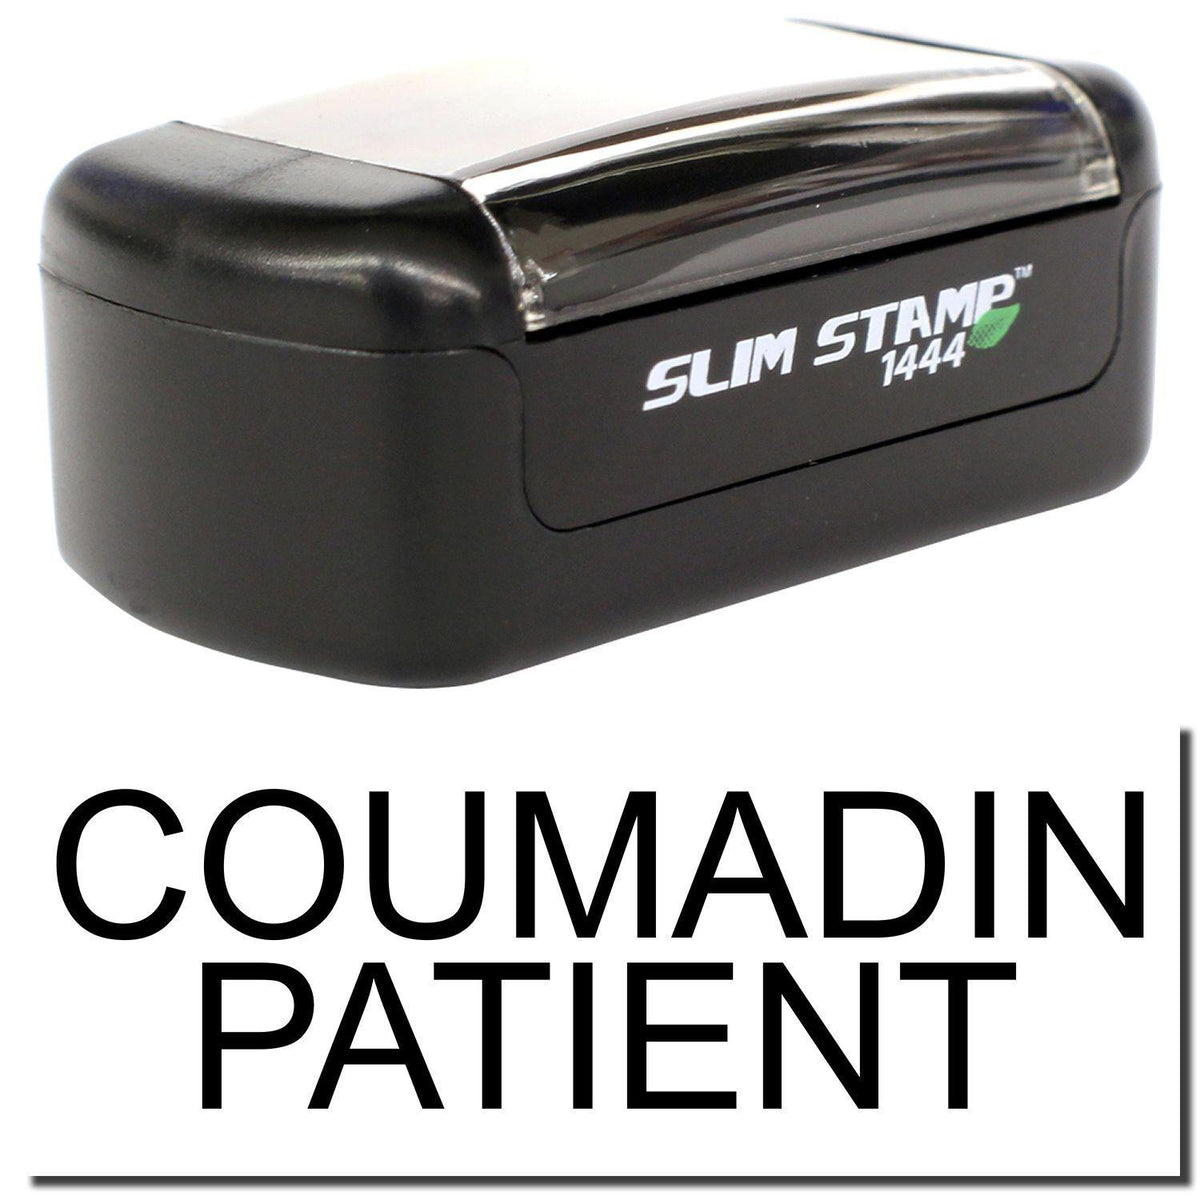 A stock office pre-inked stamp with a stamped image showing how the text &quot;COUMADIN PATIENT&quot; is displayed after stamping.